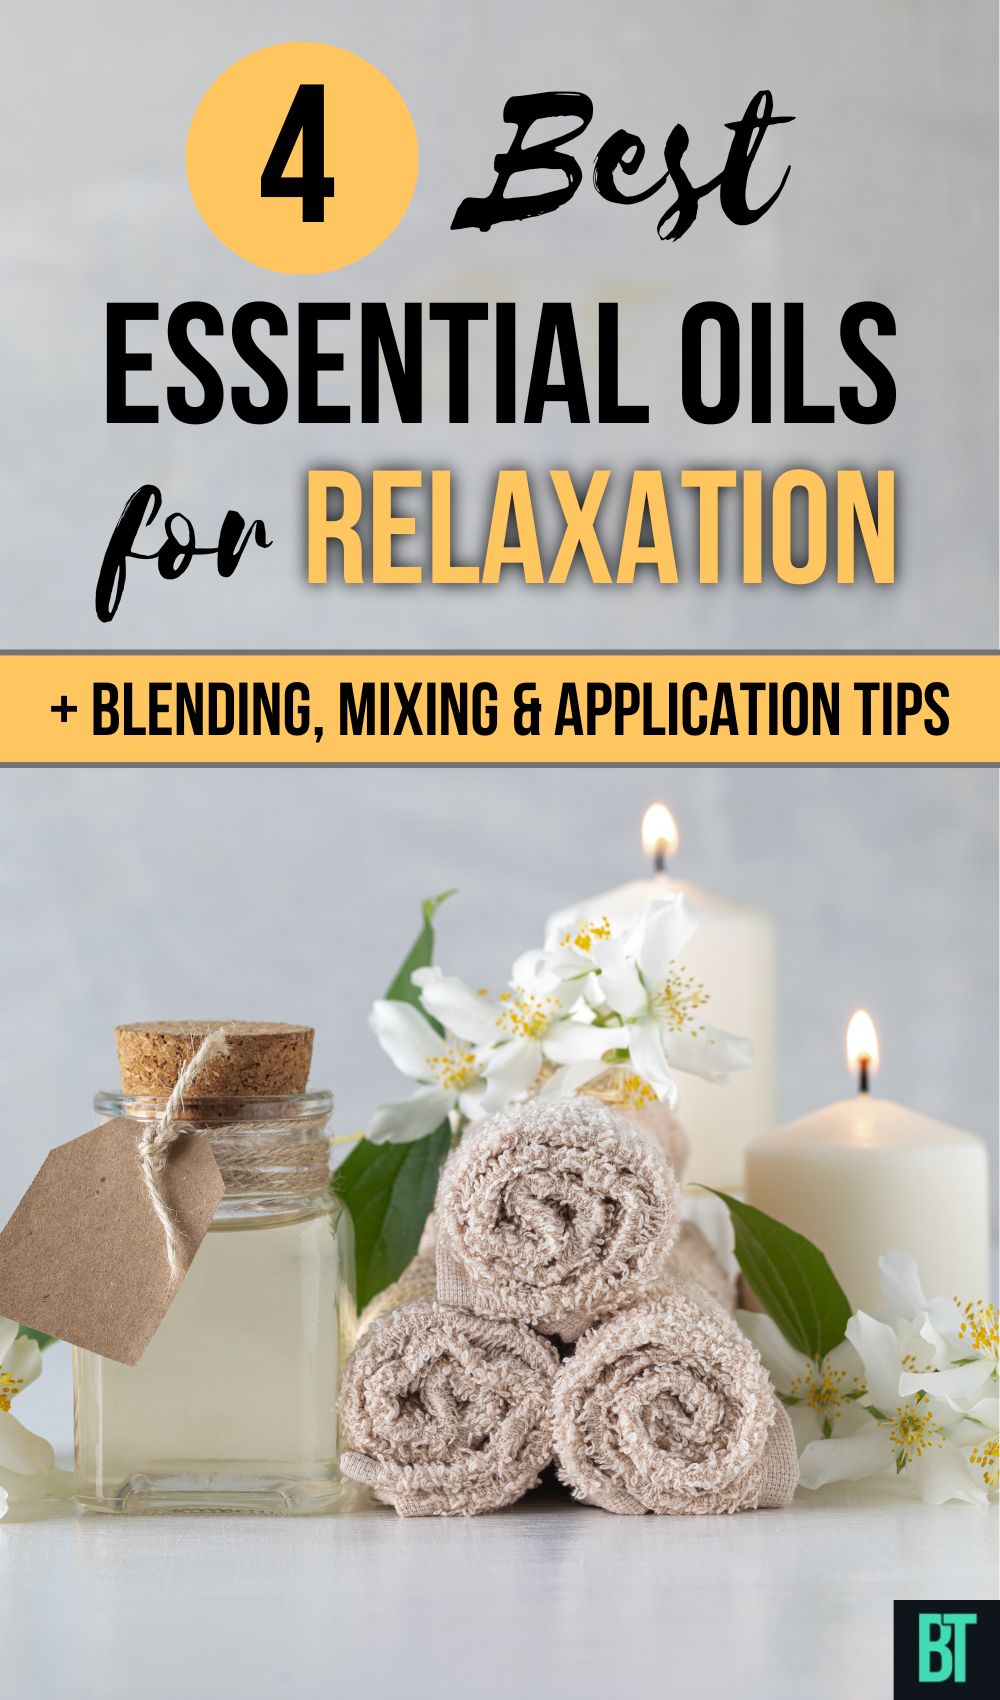 The Best Essential Oils for Relaxation Massage Experience